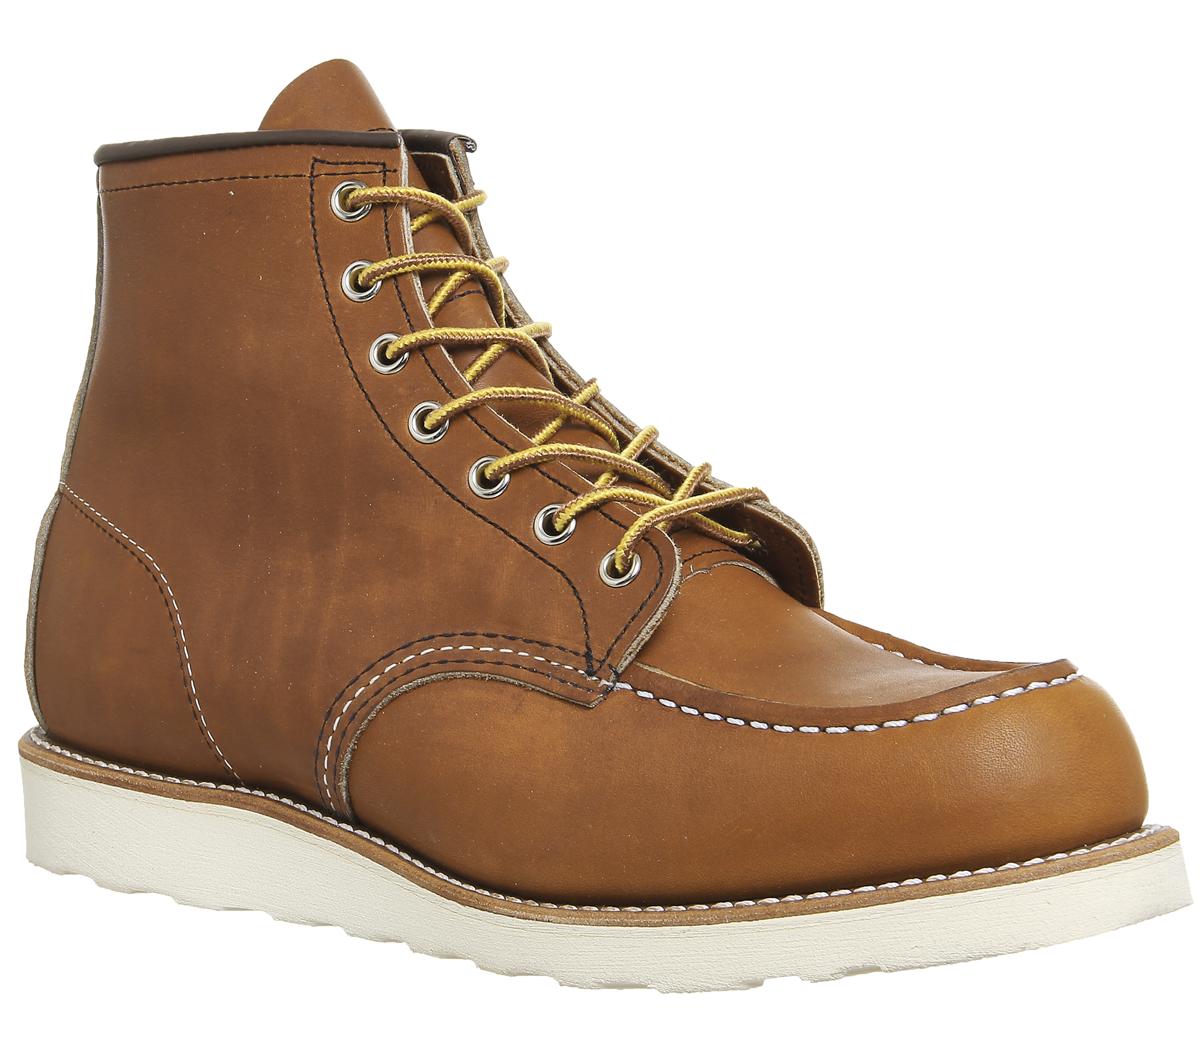 Redwing Work Wedge Boots Tan Leather - Boots